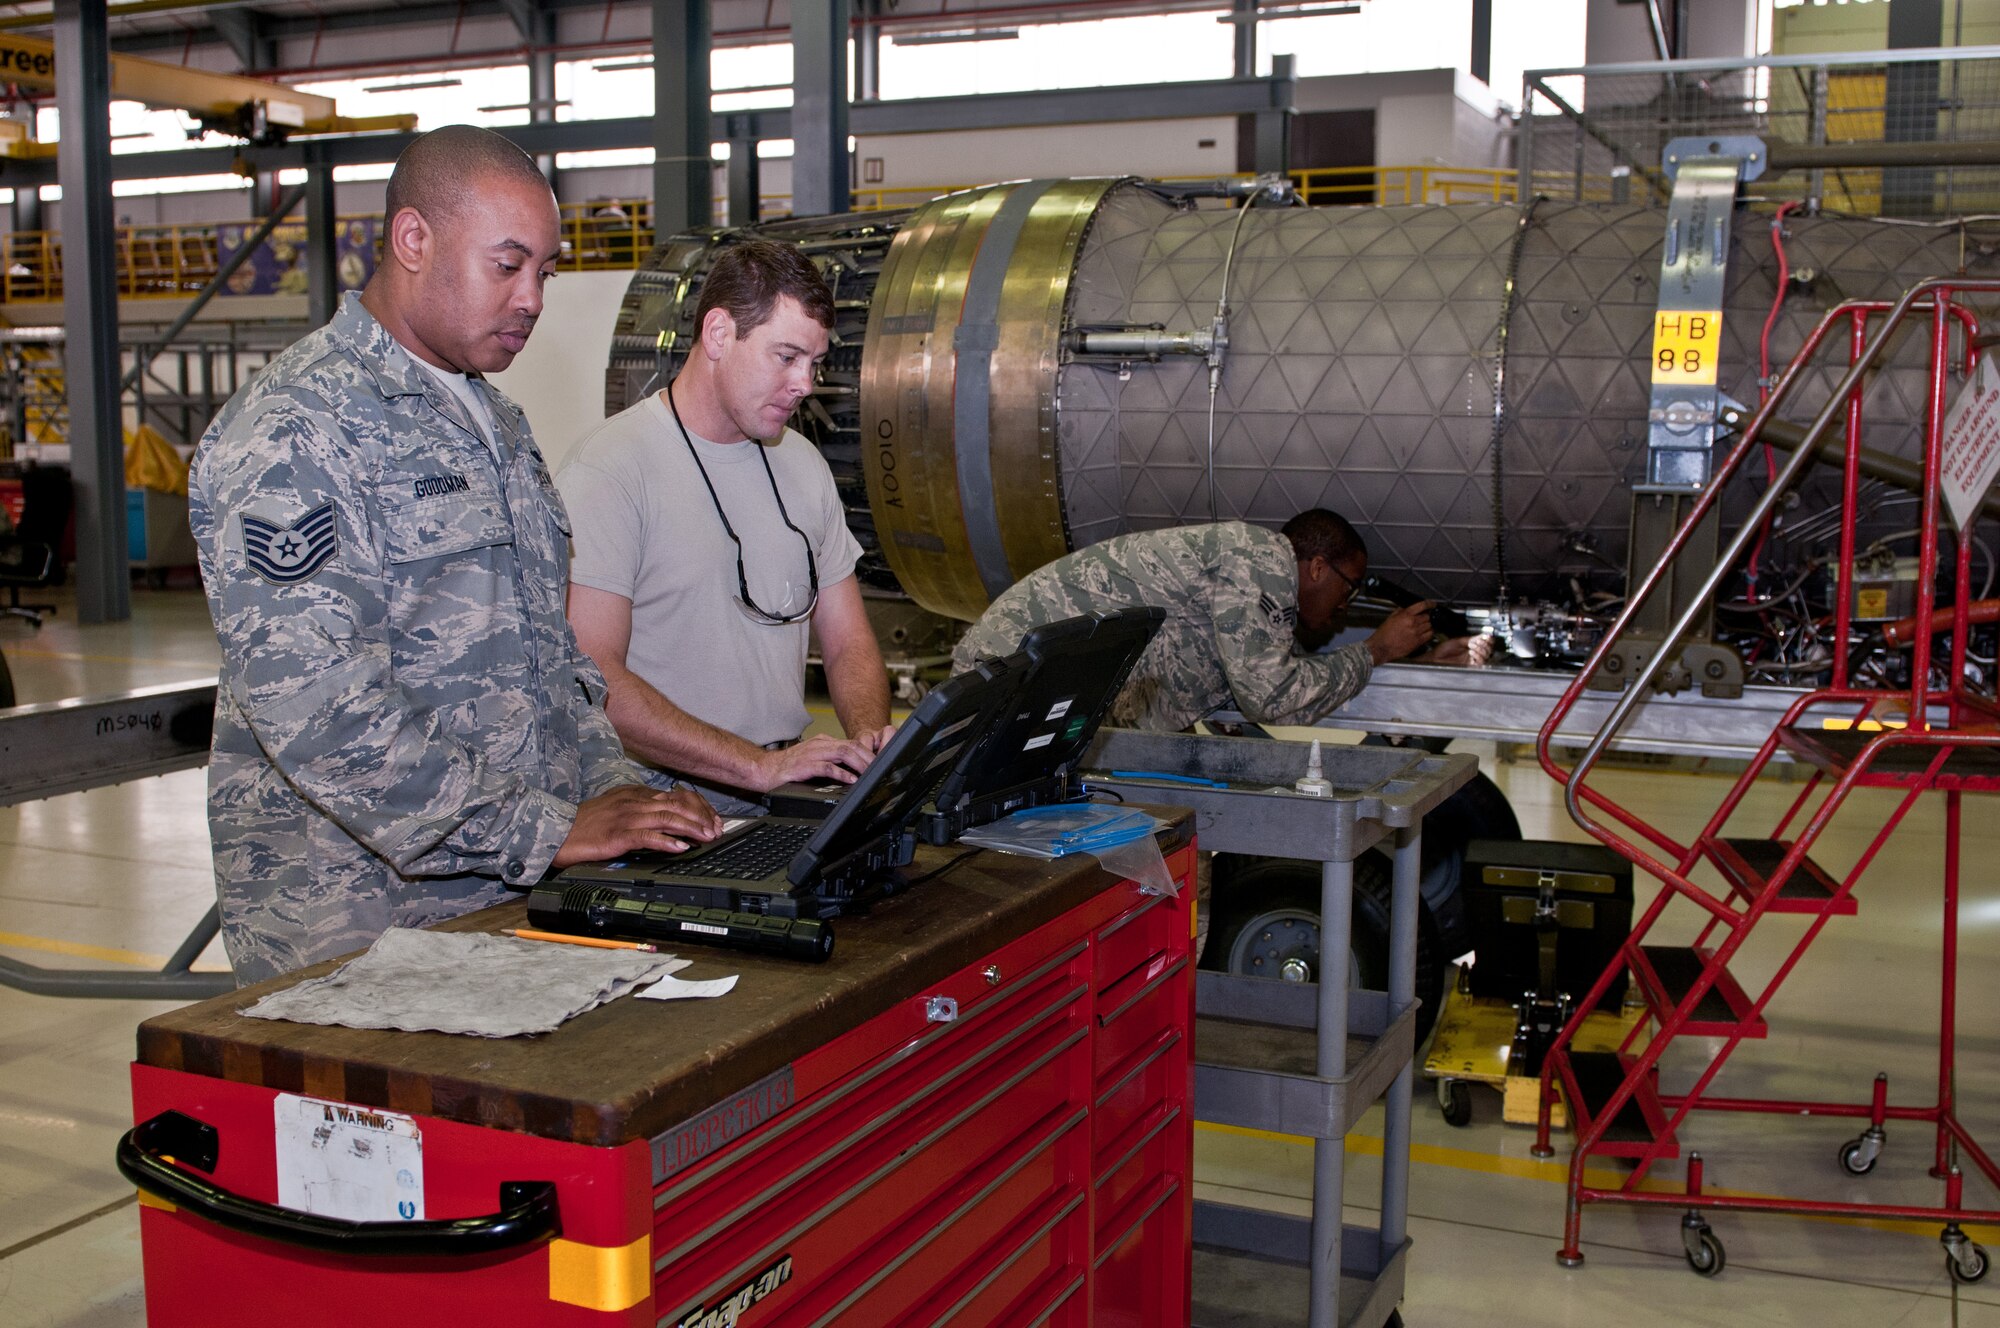 ROYAL AIR FORCE LAKENHEATH, England -- Tech. Sgt. Cory Goodman (left), Staff Sgt. Charlie Warfle (middle) and Senior Airman Justin White, aerospace propulsion maintainers from the 169th Fighter Wing, McEntire Joint National Guard Base, S.C., work final inspections on a PW-229 F-15 engine inside the 48th Component Maintenance Squadron hangar August 2, 2012.  The 169th FW maintainers are here in support of their unit, which is currently deployed to Afghanistan.  (U.S. Air Force photo by Senior Airman Connor Estes)